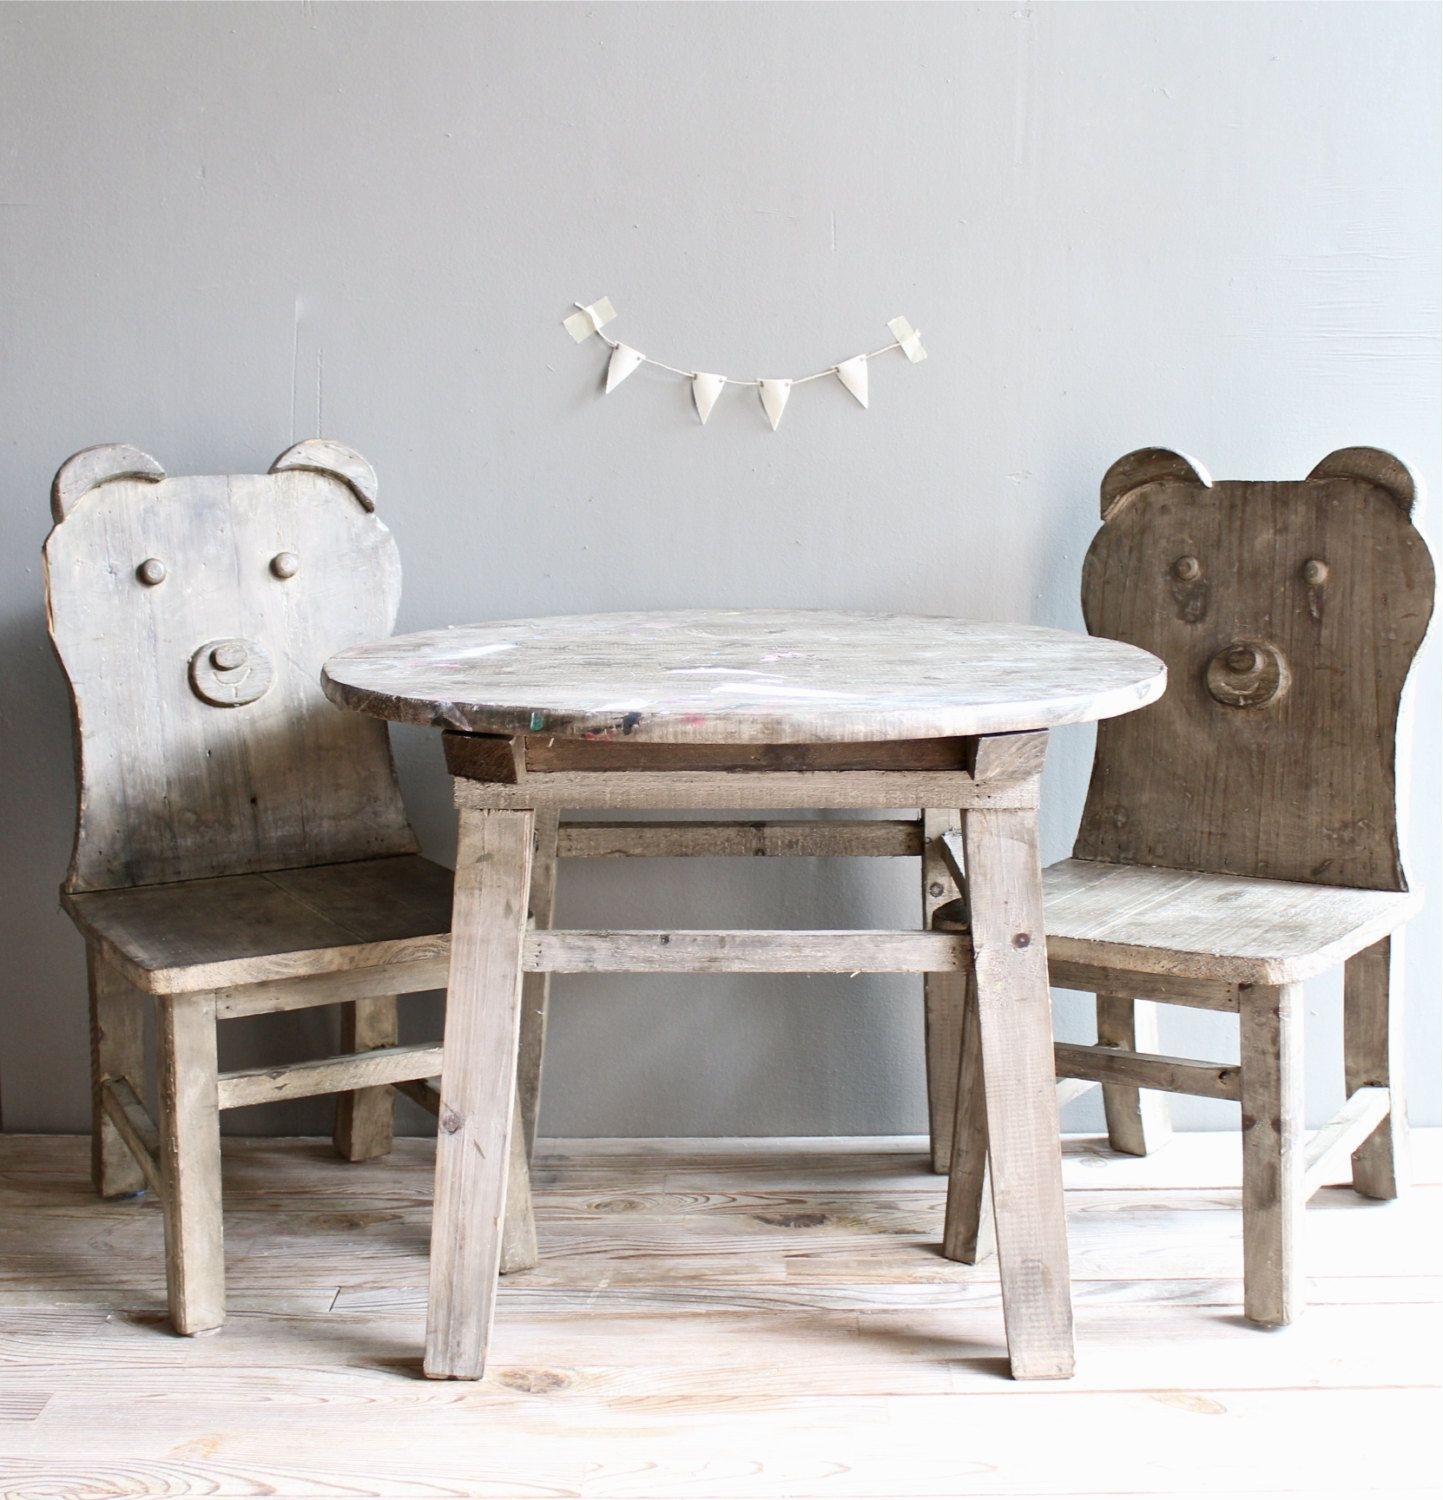 handmade childrens table and chairs